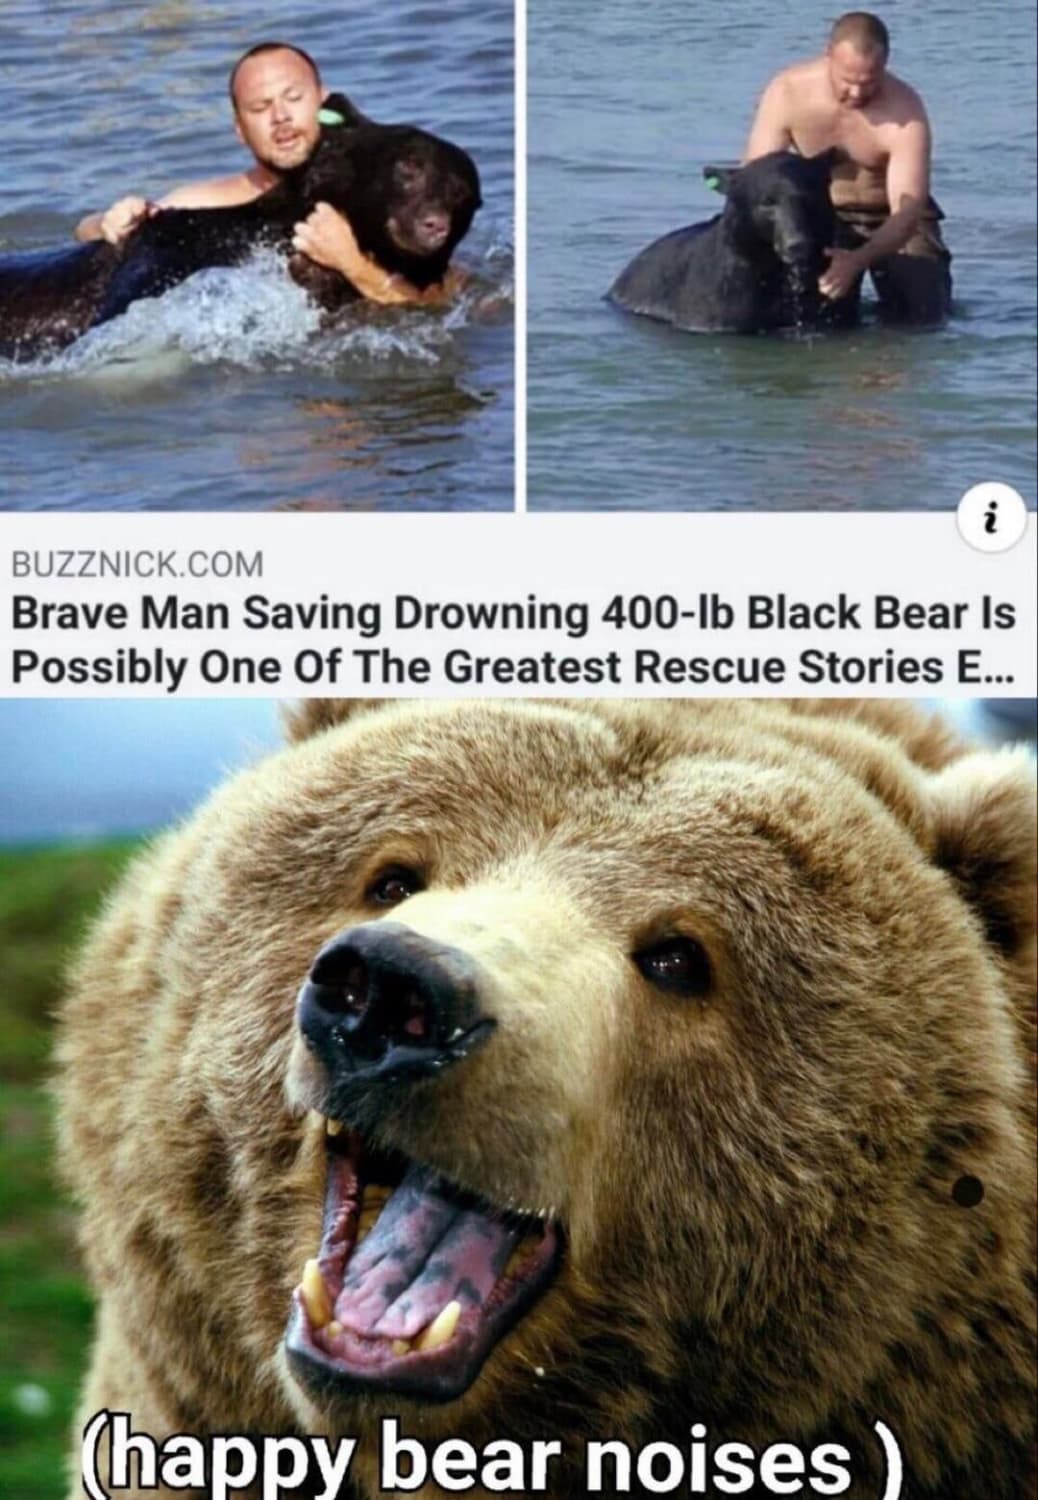 Bears are great